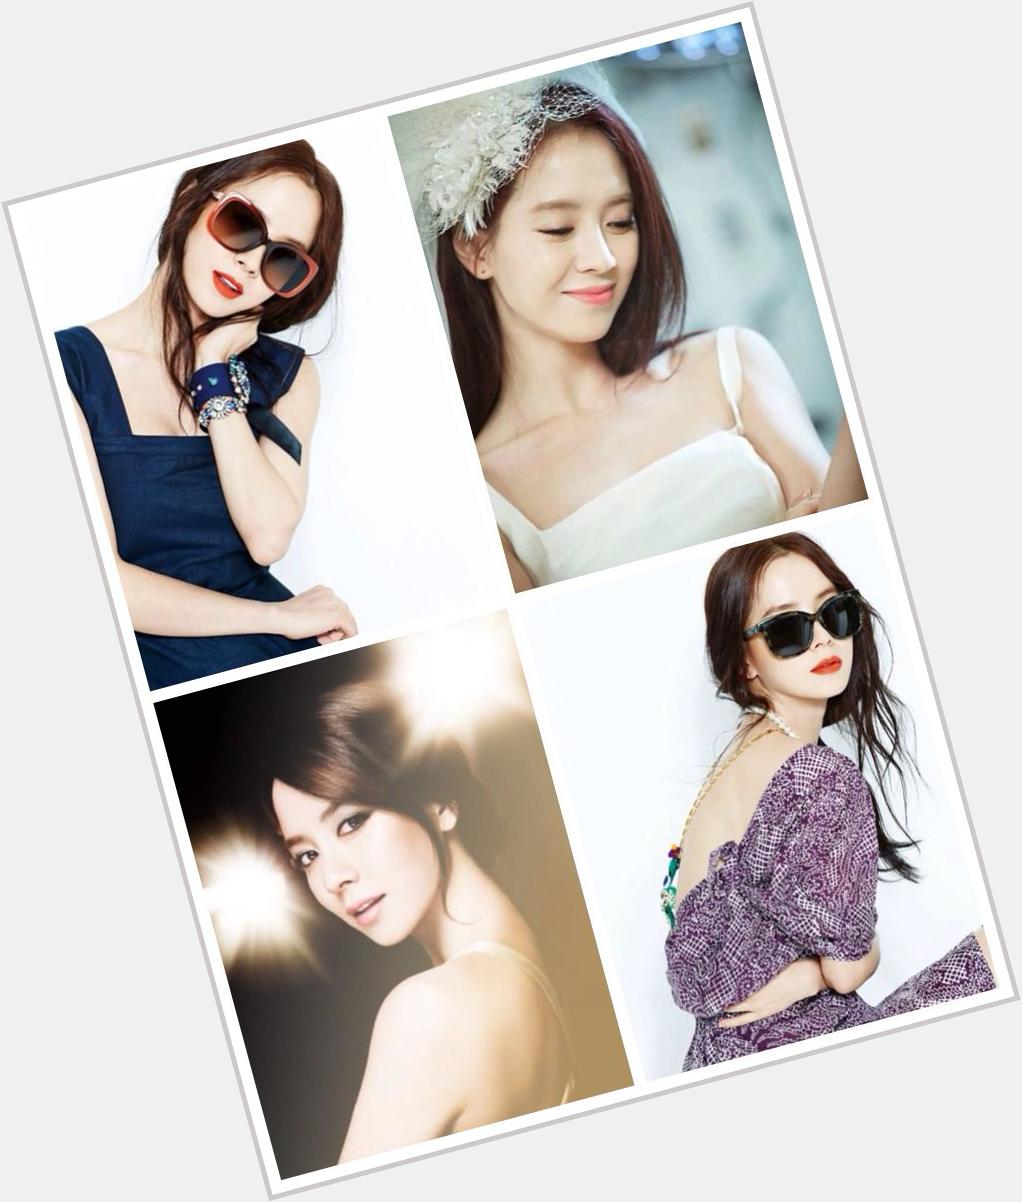 Happy belated birthday Song Ji Hyo :)
Always be happy and healthy    